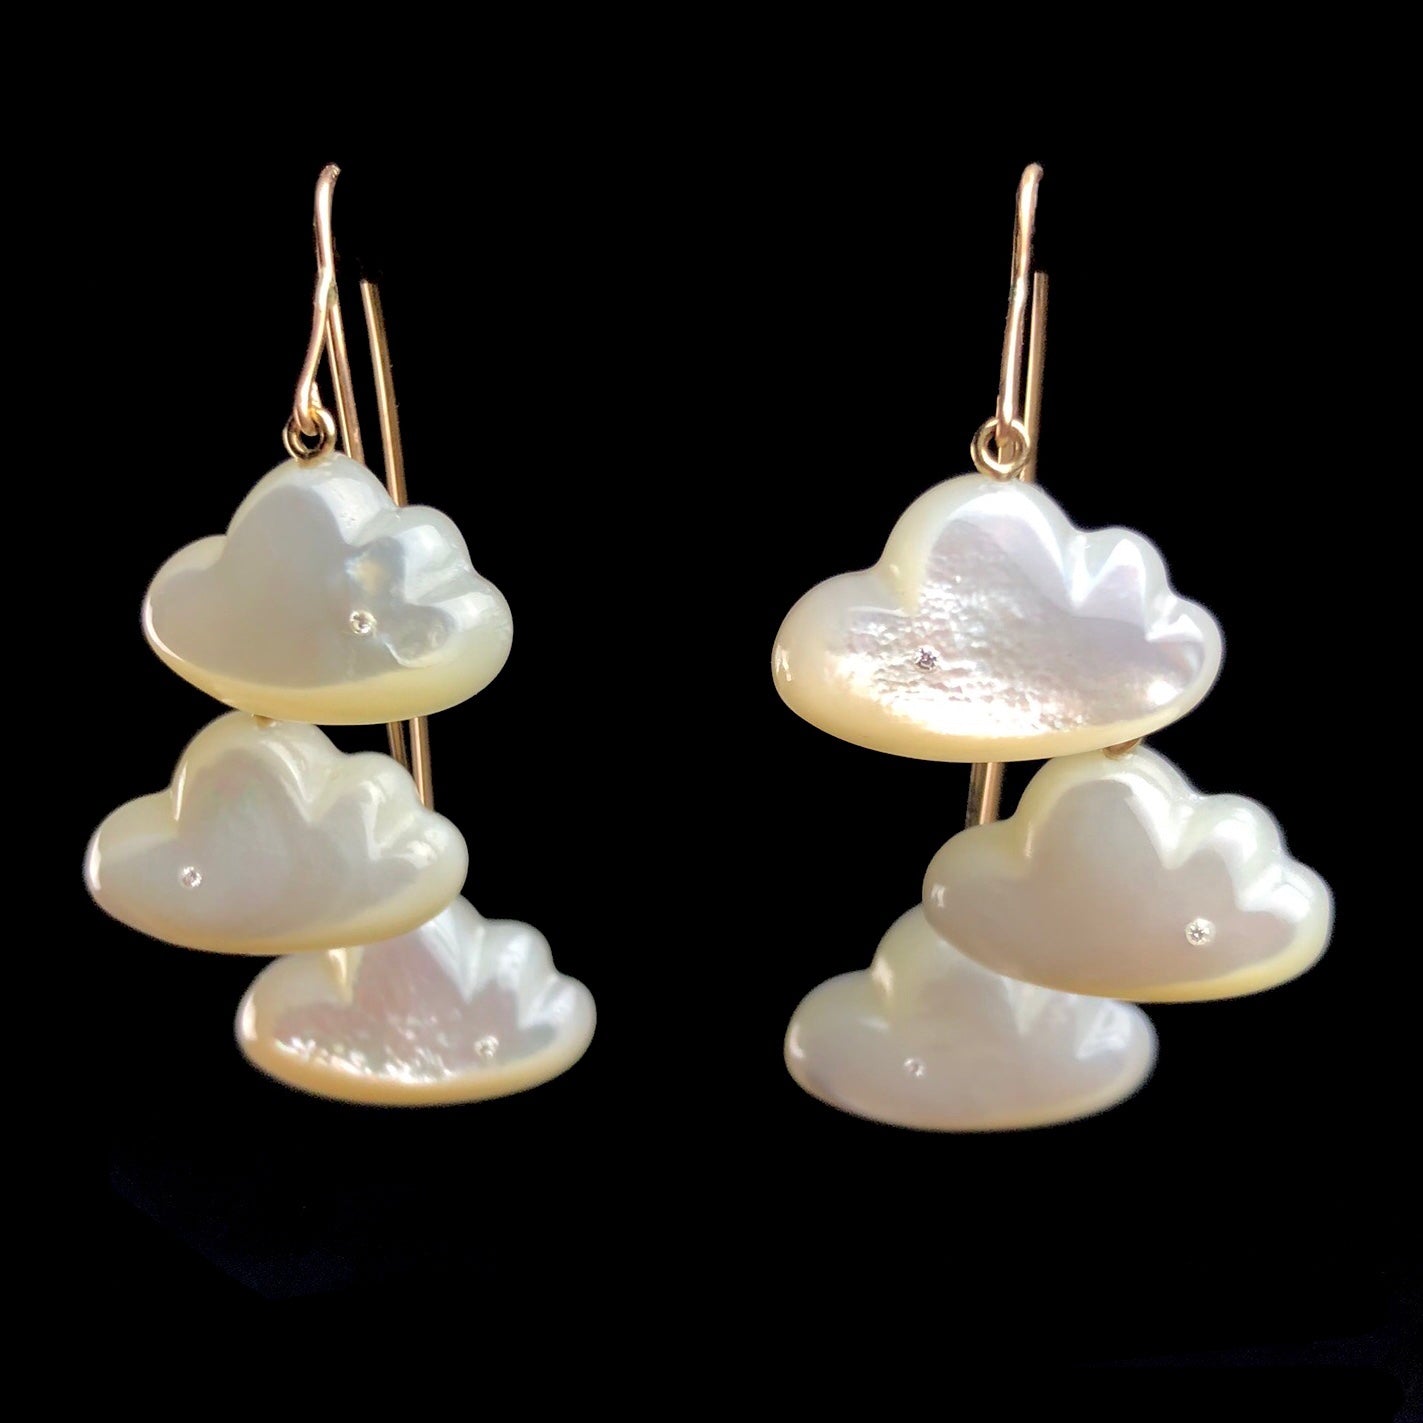 A pair of golden earrings each with three, white clouds hanging like chandeliers